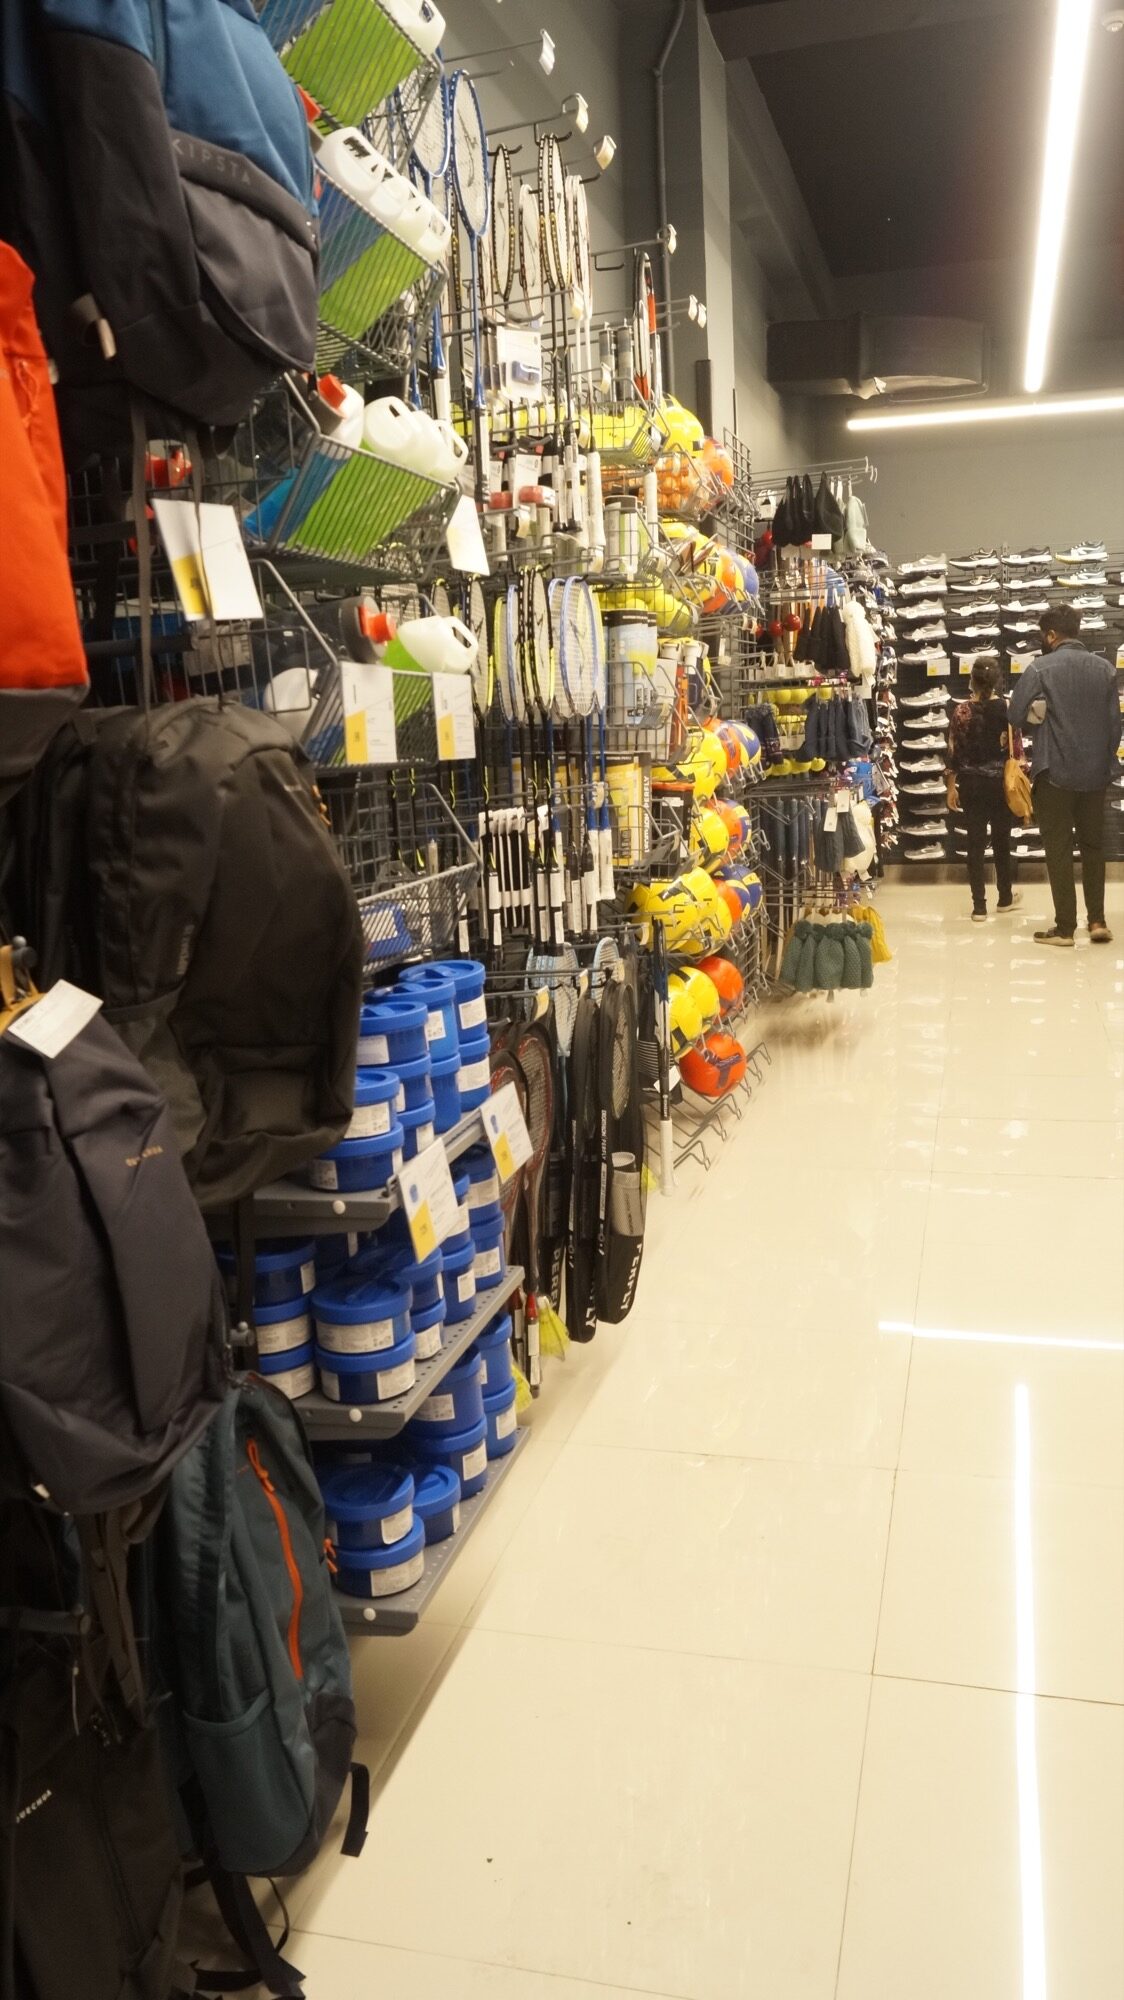 Take a peek at the all new Decathlon Connect – adobo Magazine